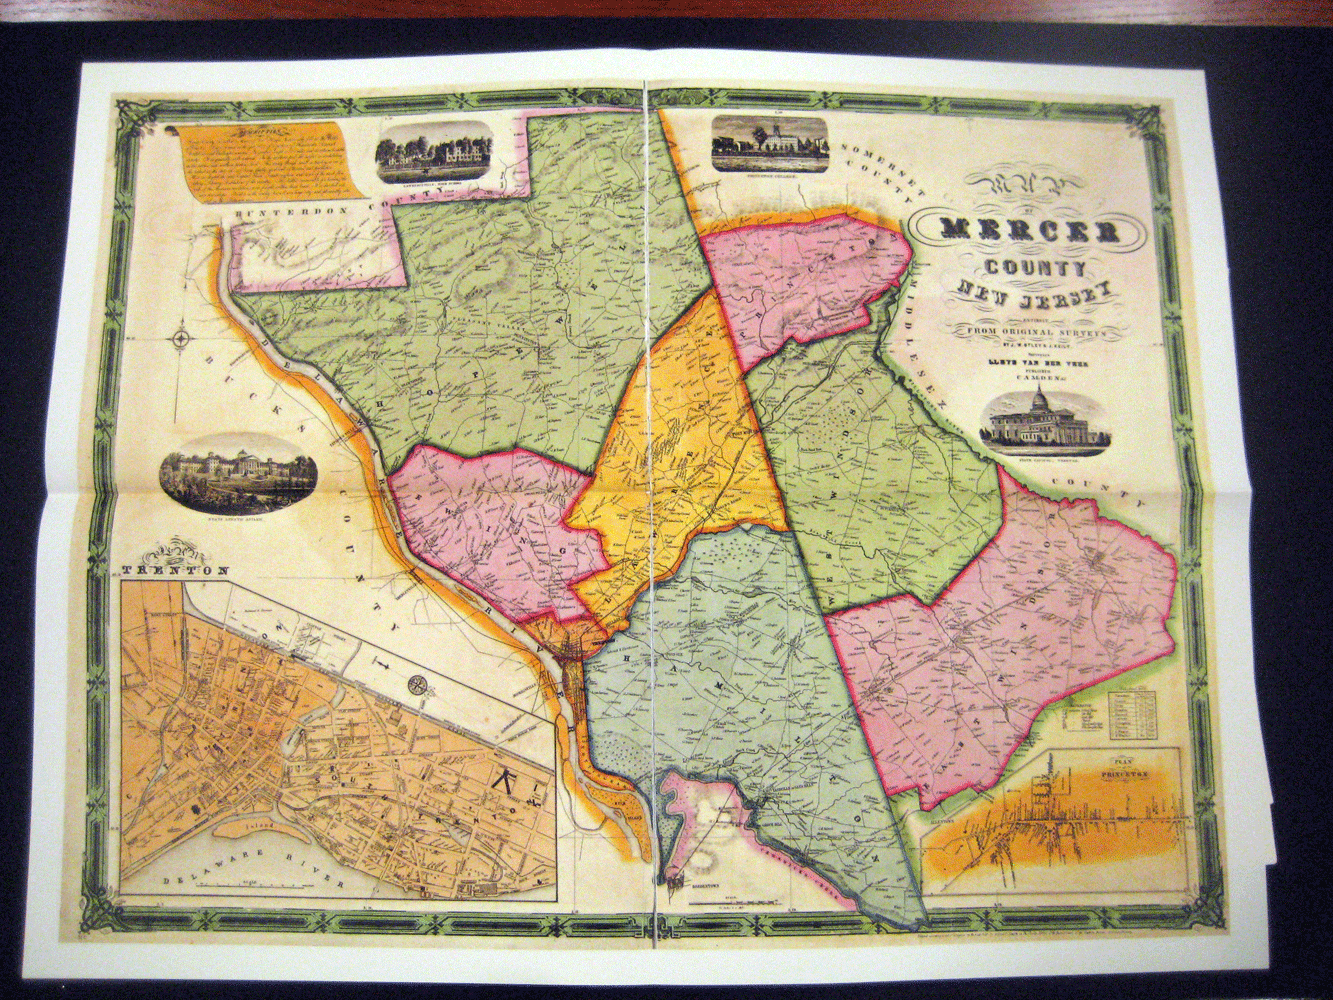 Separate county map (Mercer)